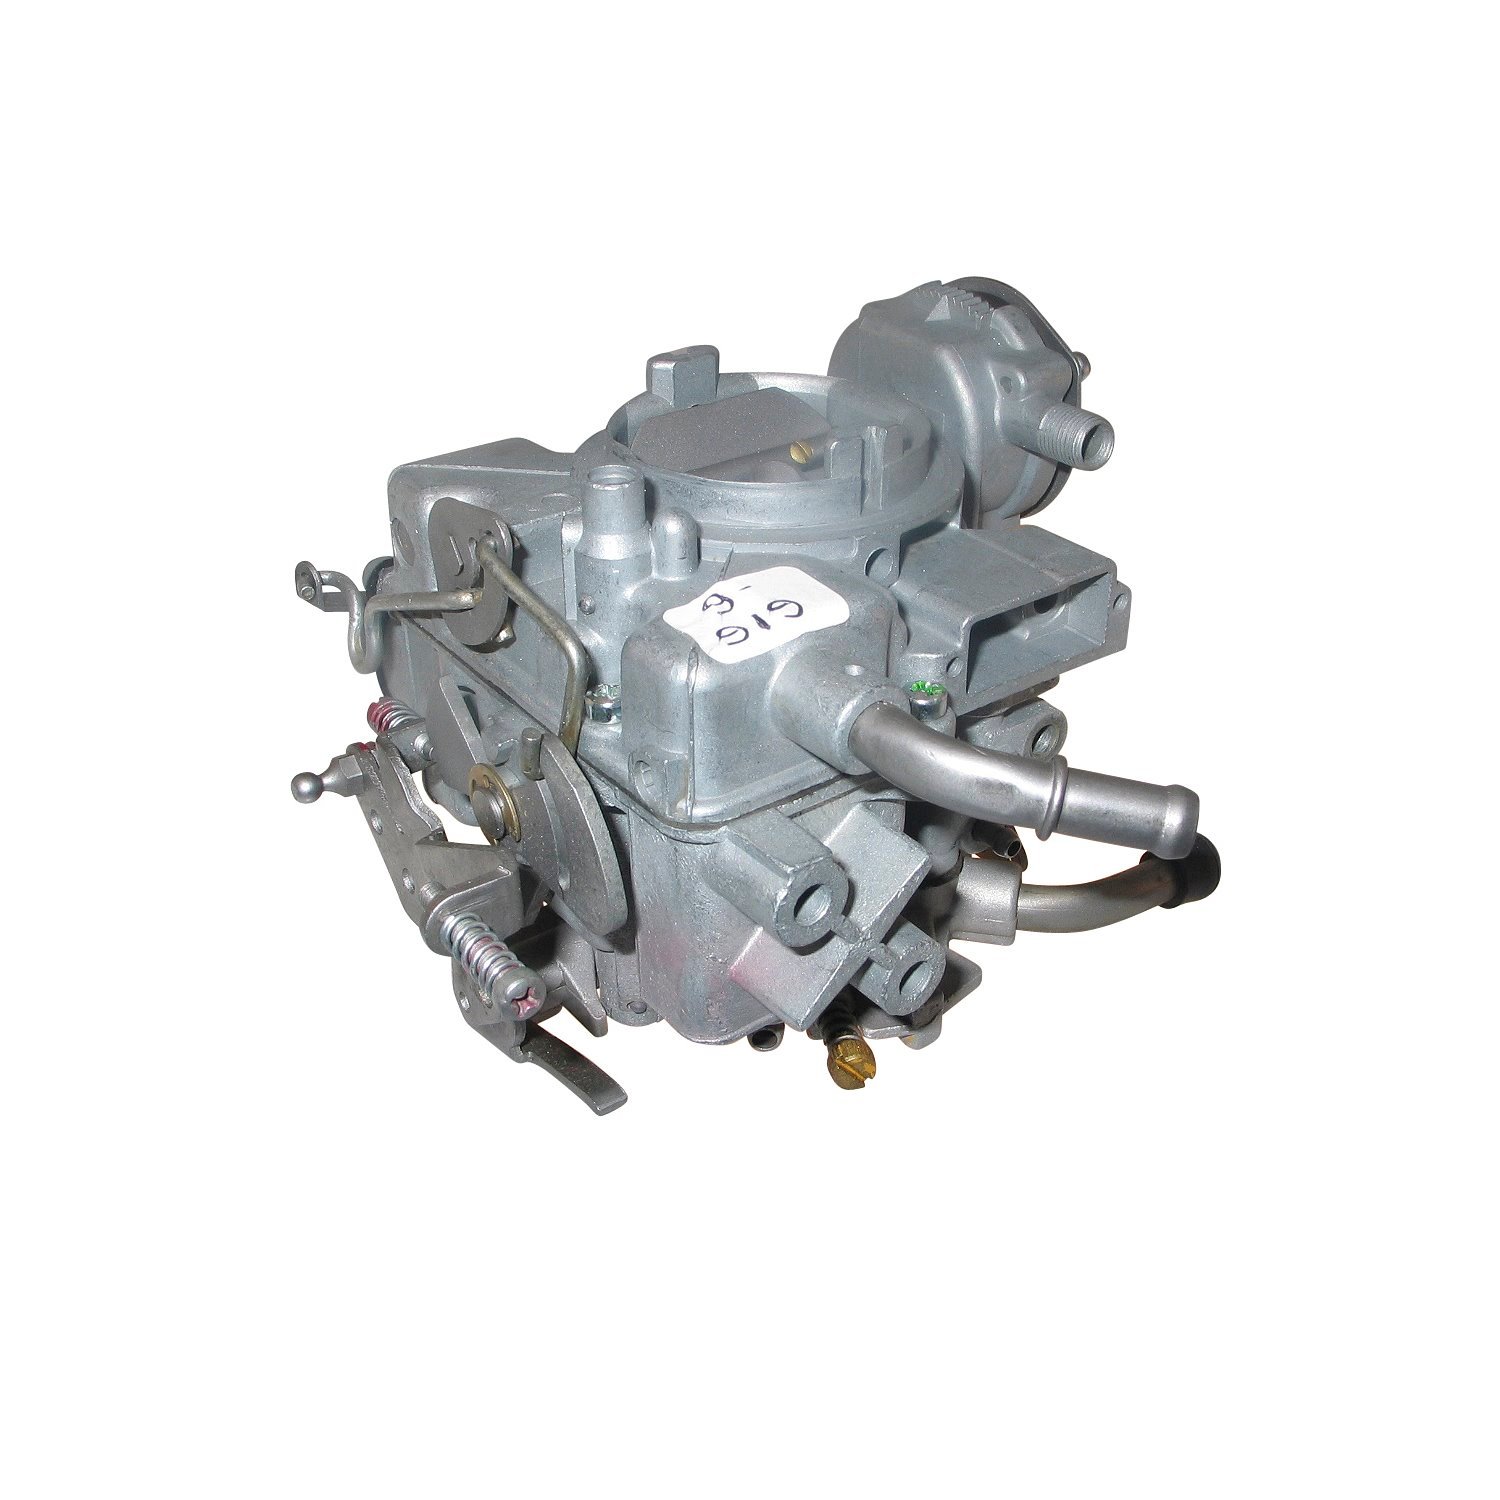 9-919 Holley Remanufactured Carburetor, 1940-Style